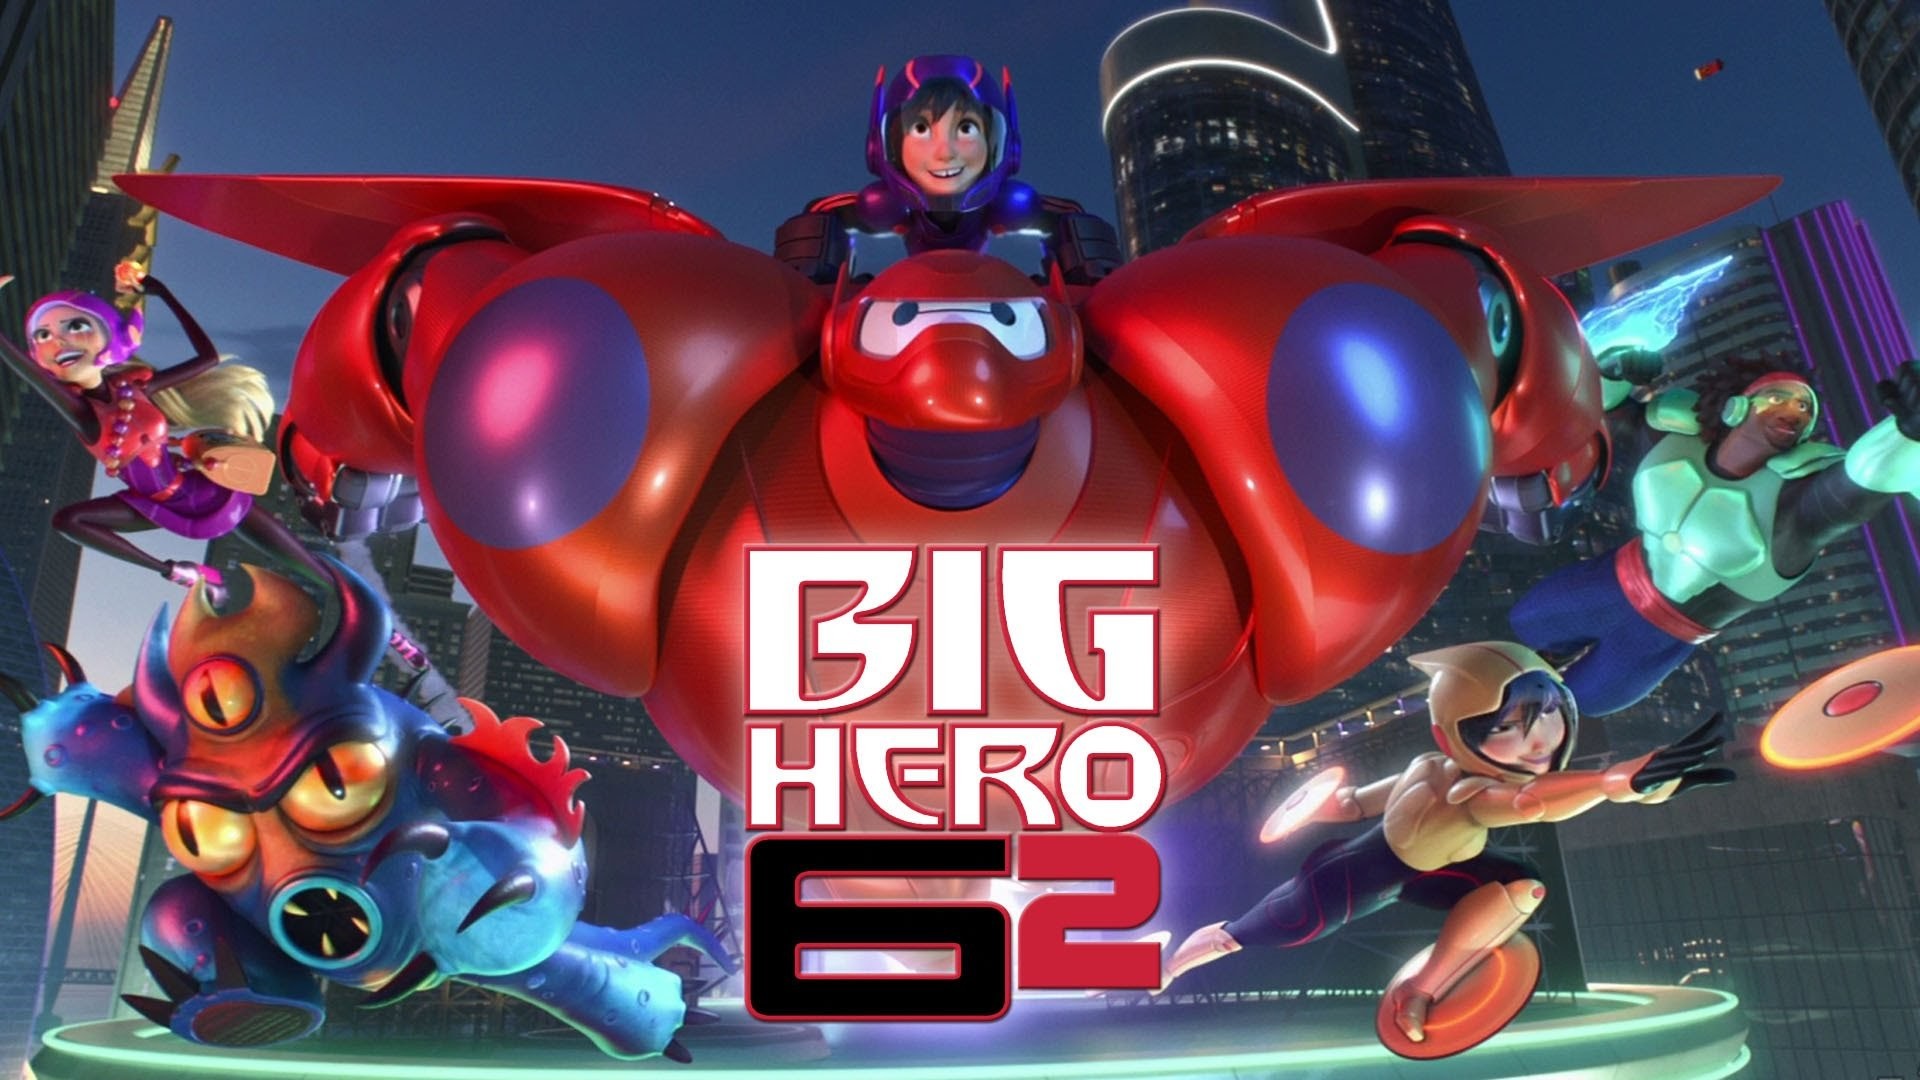 1920x1080 Big Hero Wallpaper for PC Full HD Pictures 1920Ã1080